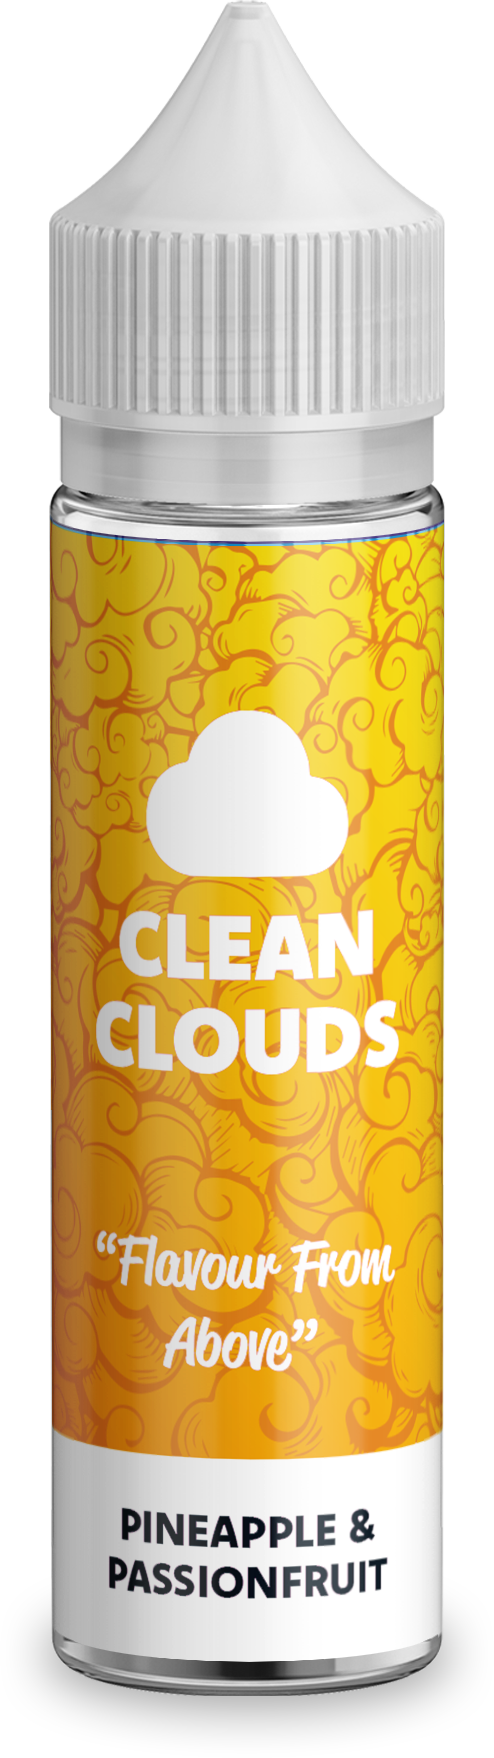 CLEAN-CLOUDS-50ML-PINEAPPLE-&-PASSIONFRUIT